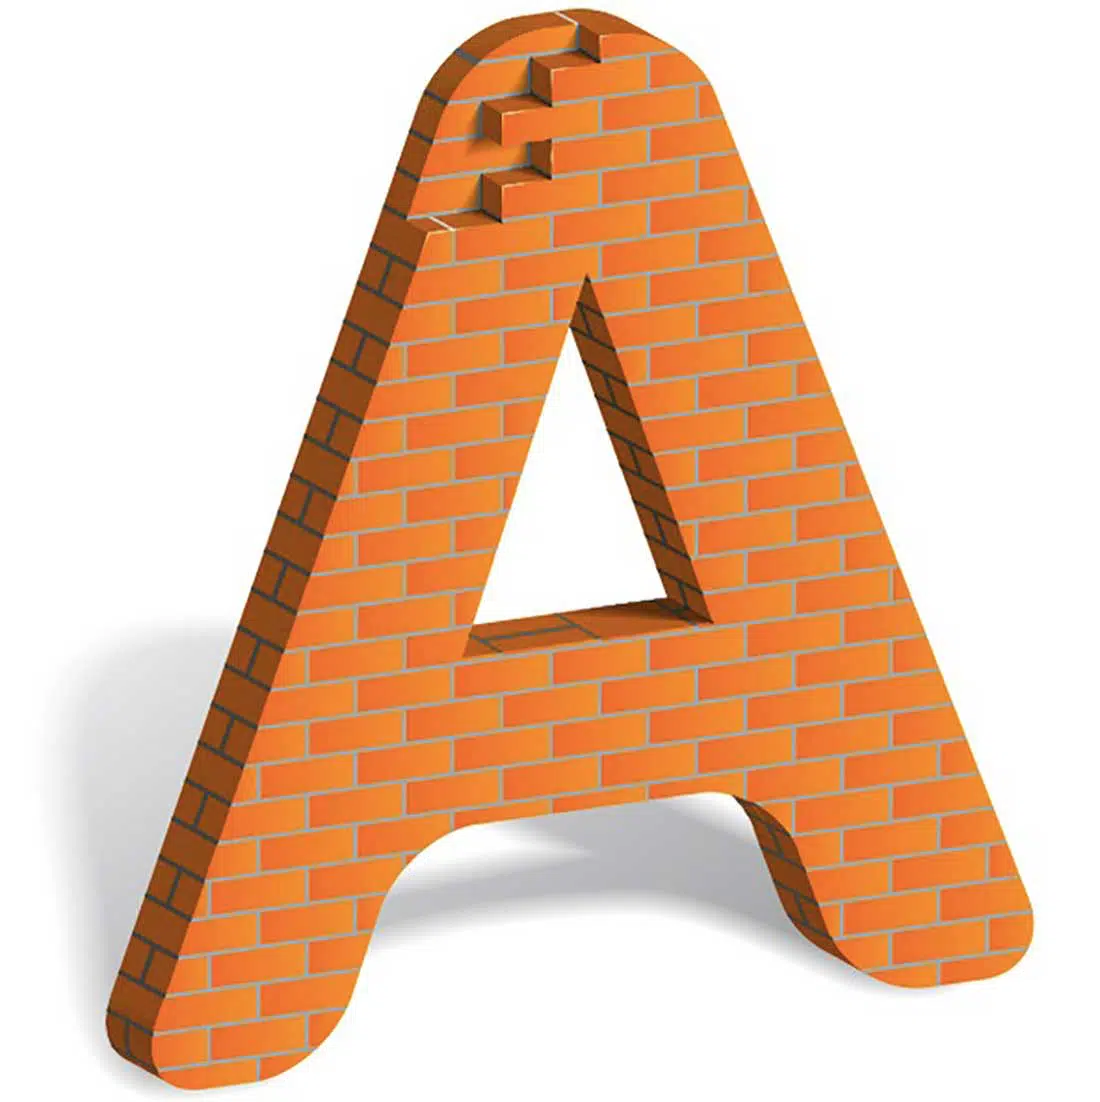 1 How to Build a Brick Letter